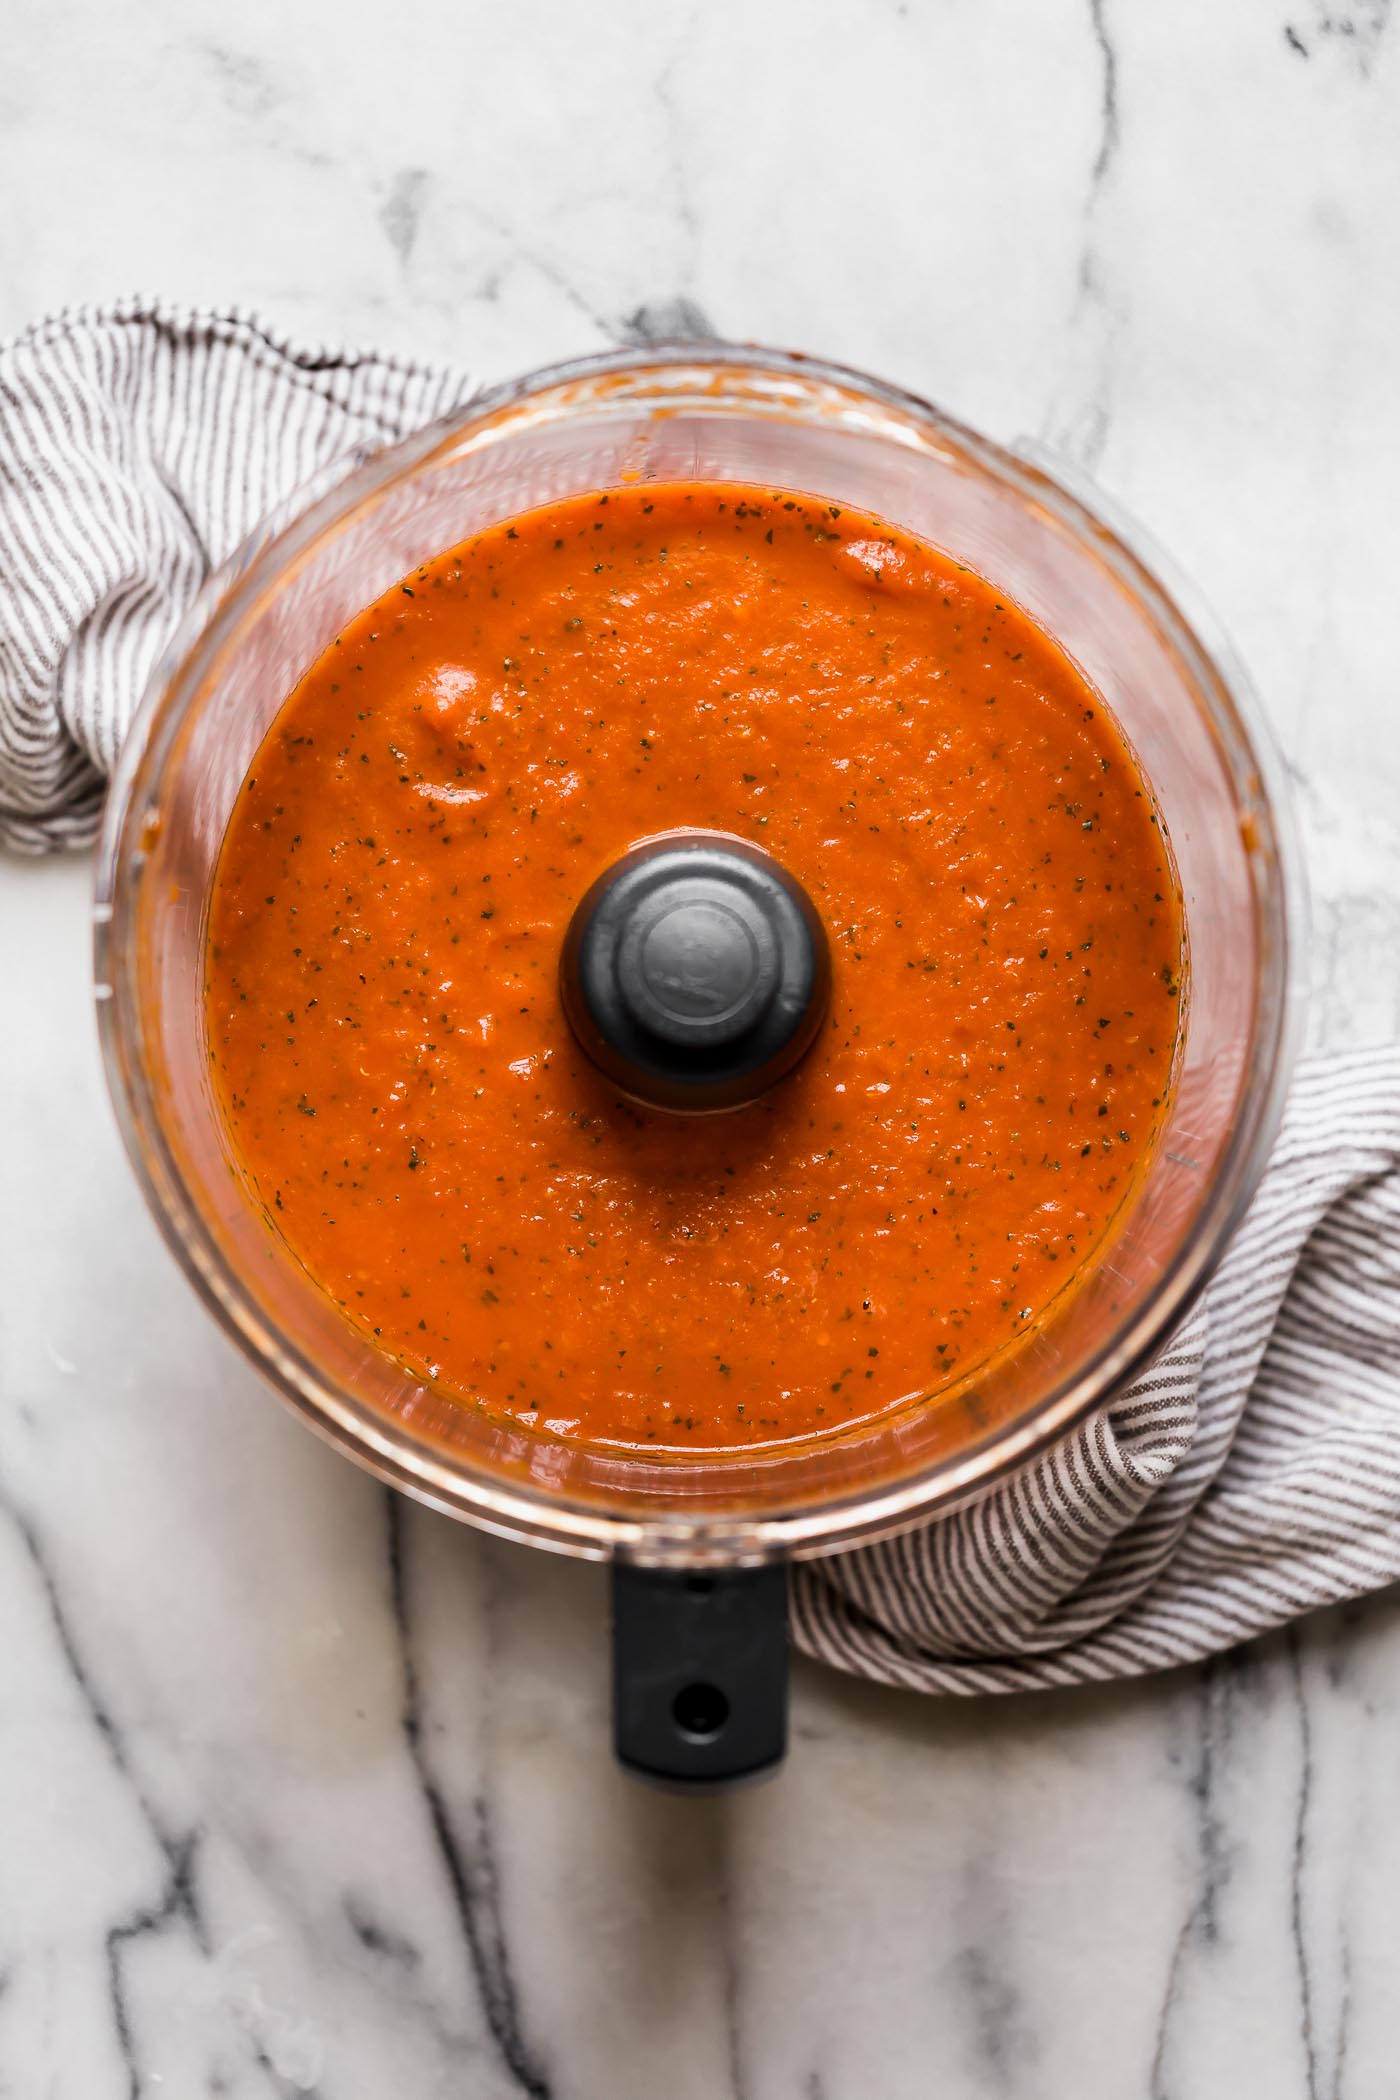 a quick & fresh homemade pasta sauce, this roasted red pepper pomodoro sauce is made with 5-ingredients in less than 10 minutes! #playswellwithbutter #pomodoro #pastasauce #easypastarecipe #healthypastarecipe #homemadepastasauce #easypastasauce #healthypastasauce